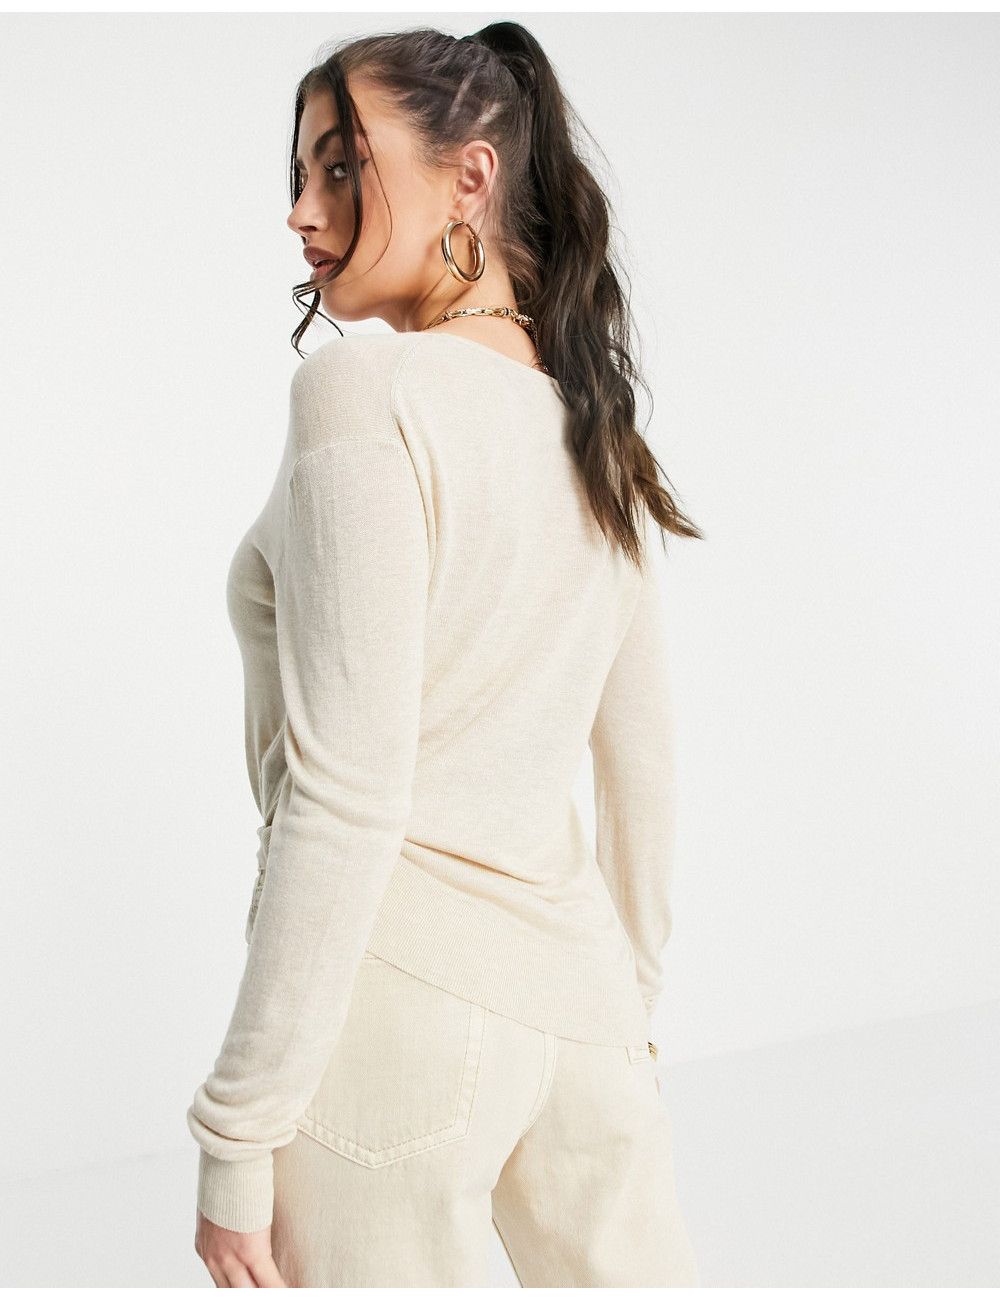 Selected v-neck knit top in...